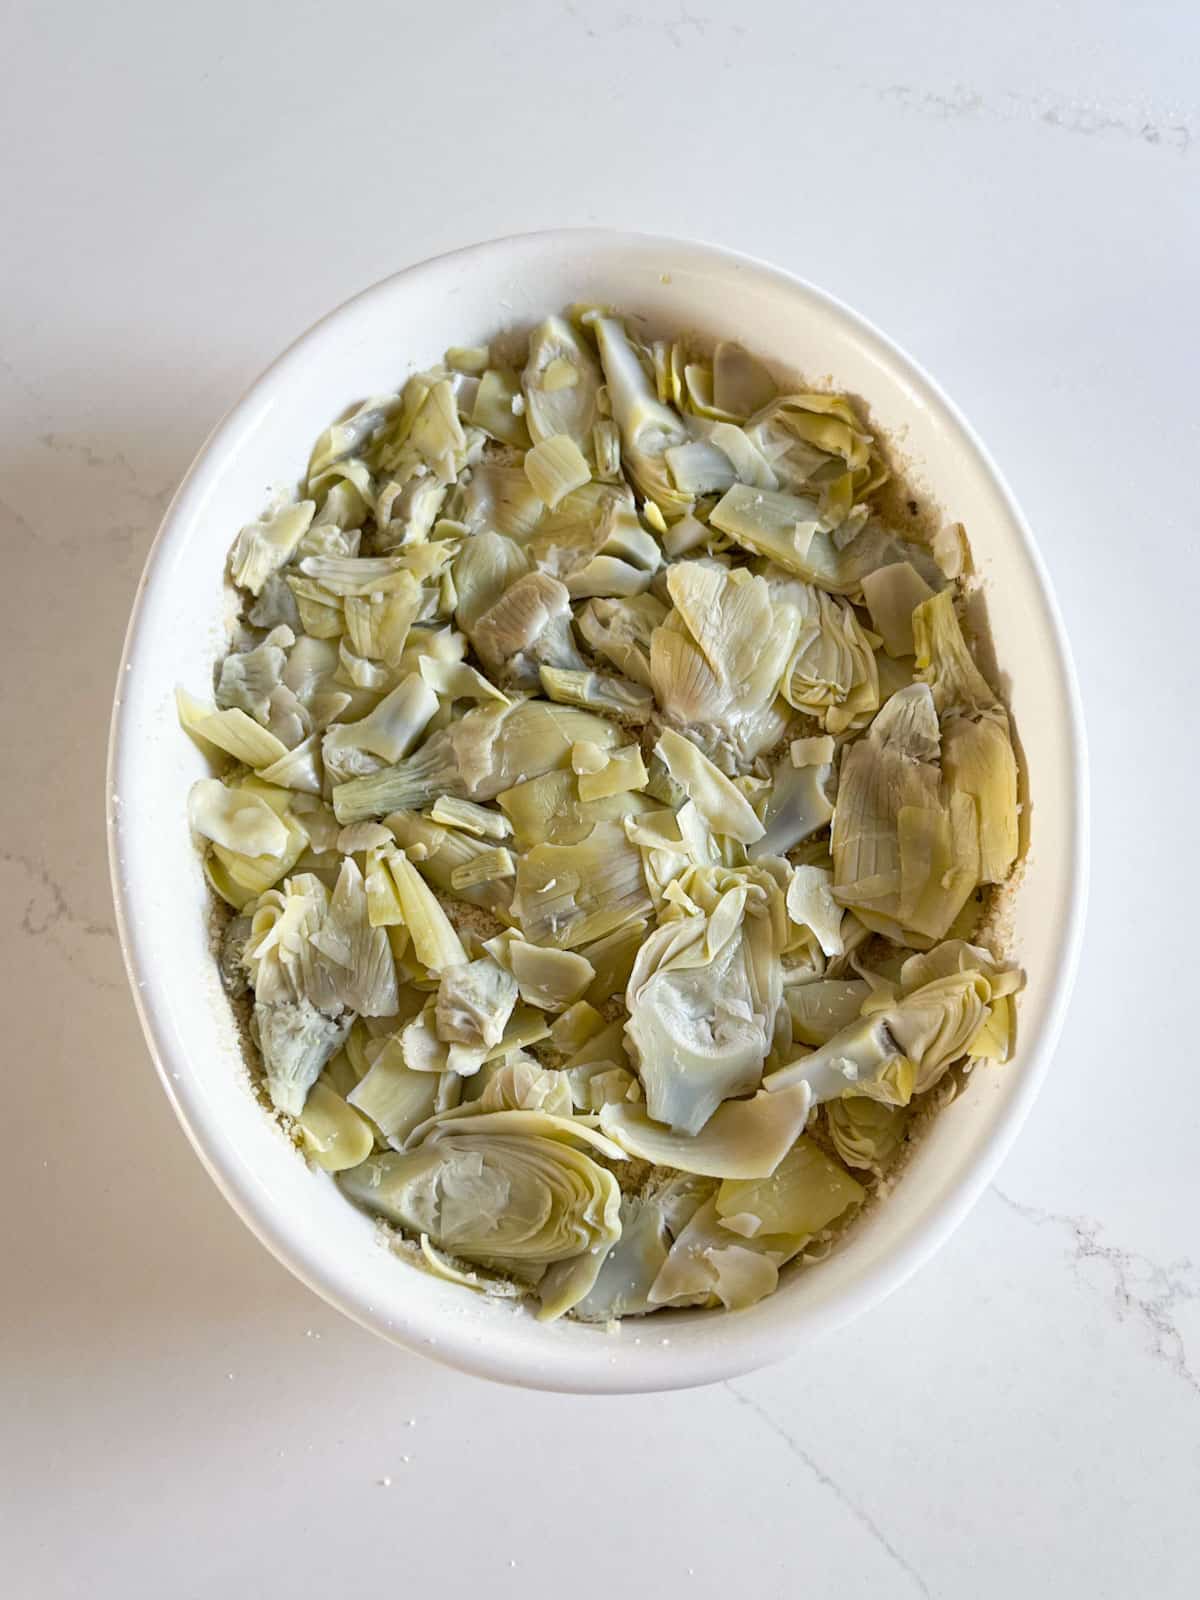 Another layer of artichokes in a white baking dish.